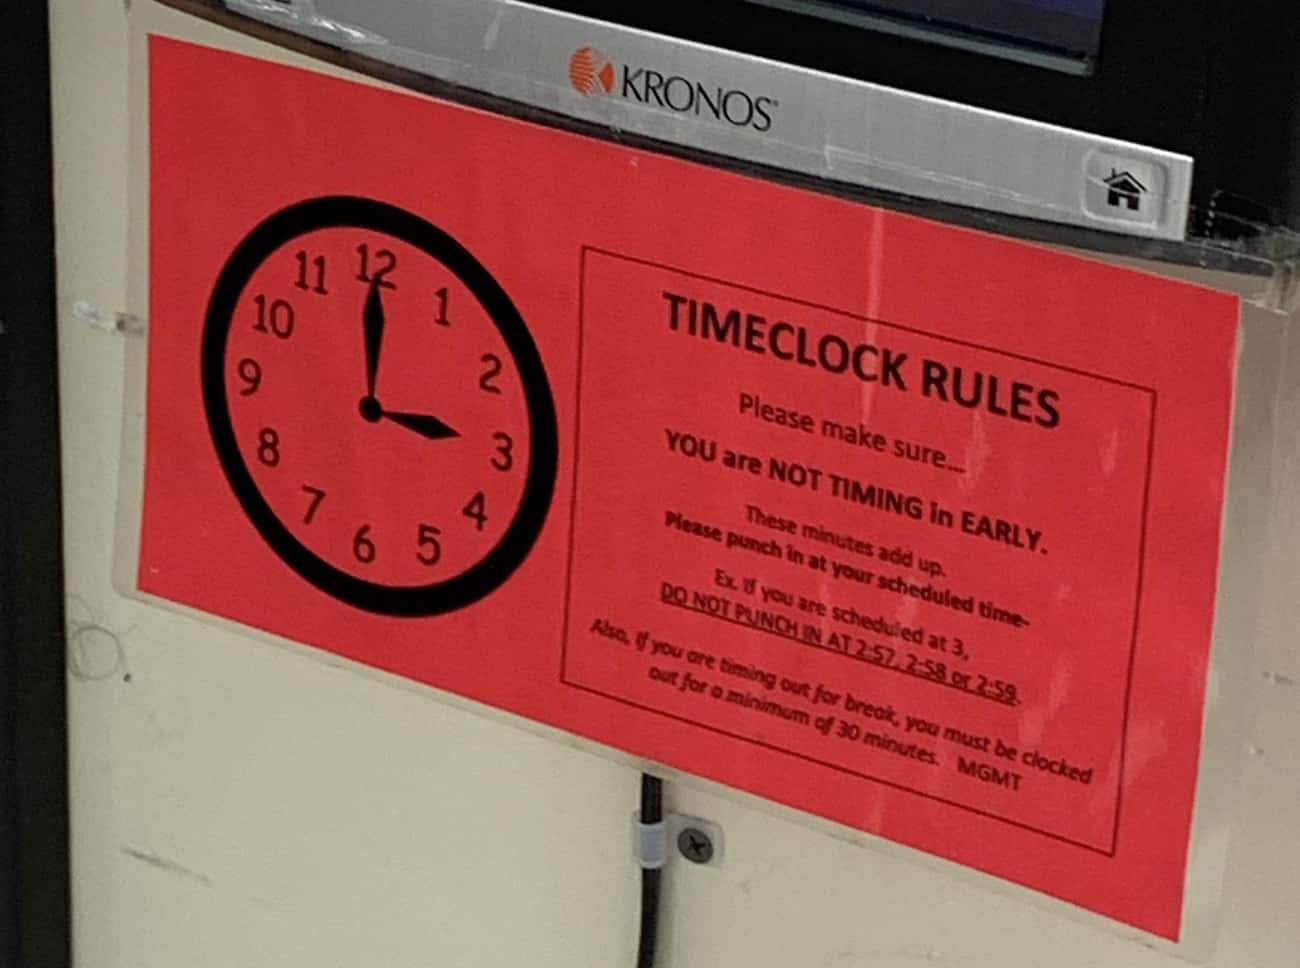 sign - Kronos 11 12 10 1 Timeclock Rules 9 2 Please make sure... 3 You are Not Timing in Early. 8 7 6 5 9 These minutes add up. Mease punch in at your scheduled time you are scheduled at 3. Do Not Pinch In AT252.25805 so you are timing out for break, you 